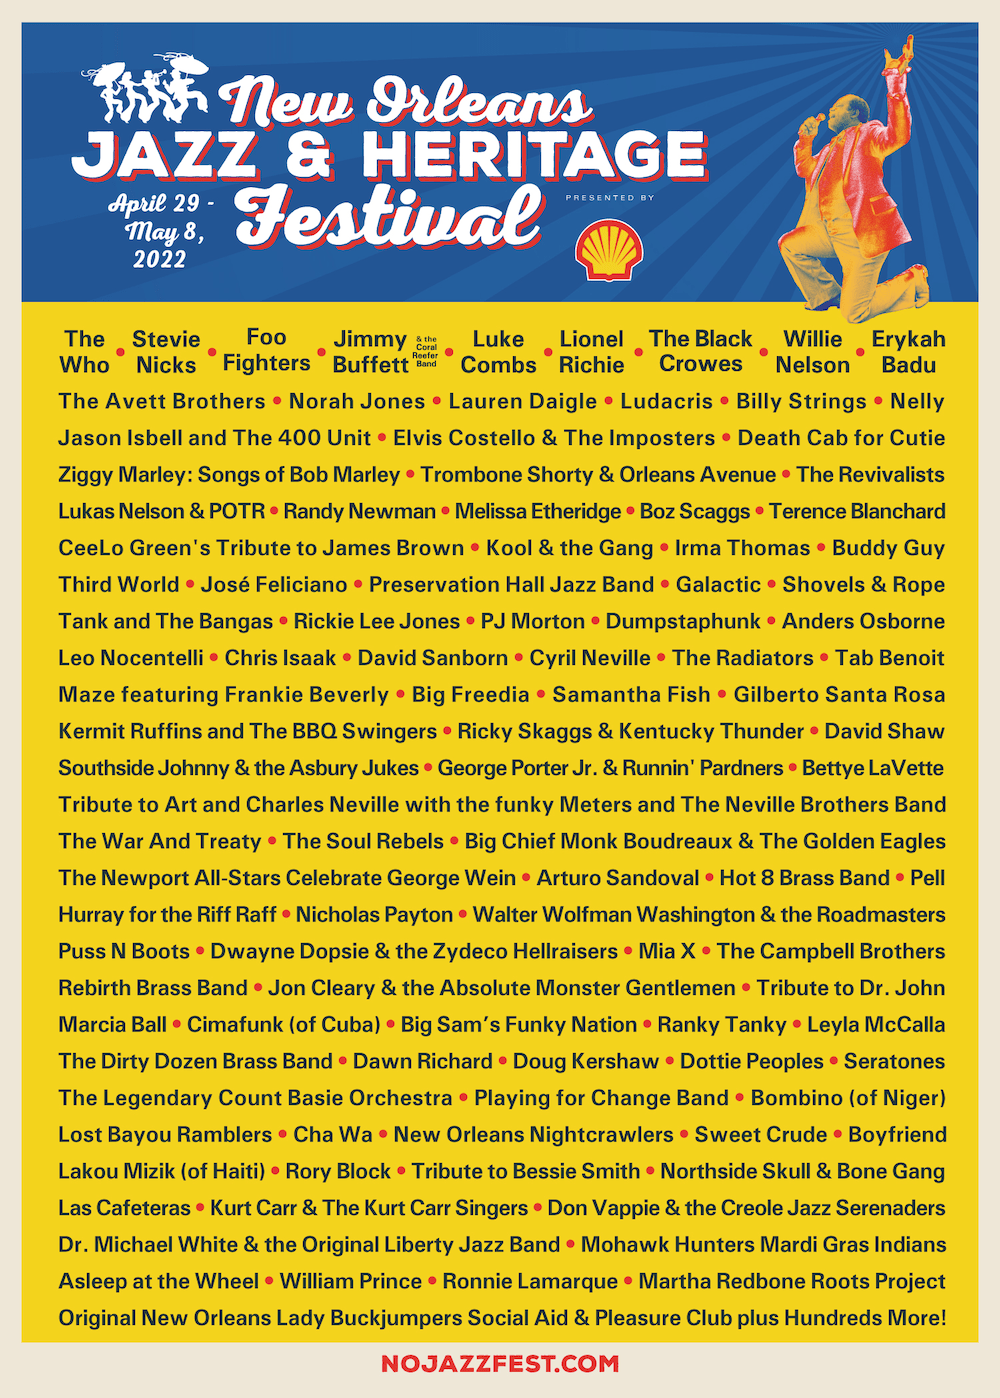 New Orleans Jazz & Heritage Festival 2022 Lineup poster image